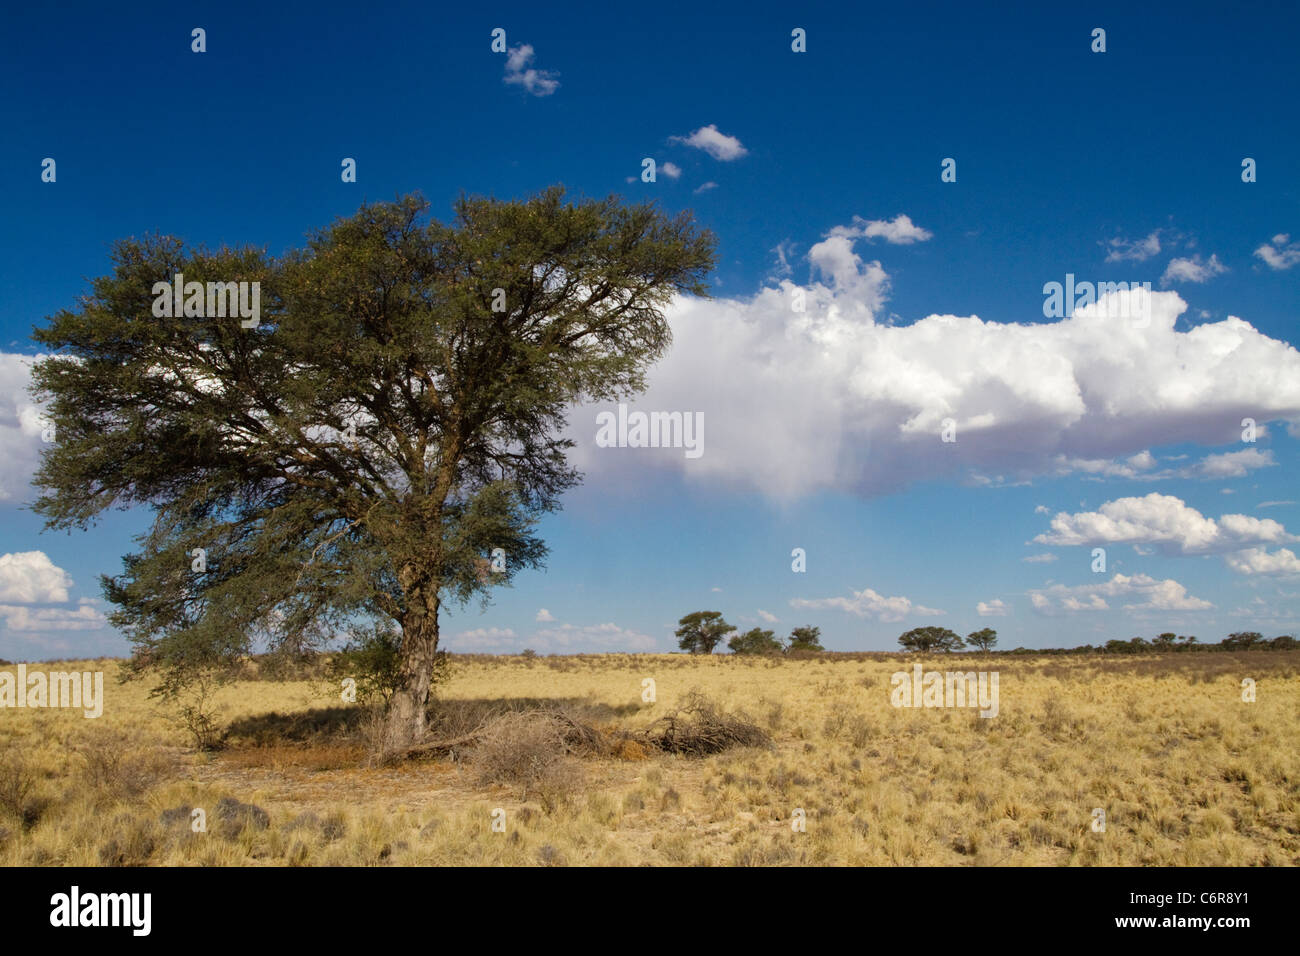 Kalahari landscape with lone Camelthorn tree (Acacia erioloba) and scattered cumulus clouds Stock Photo